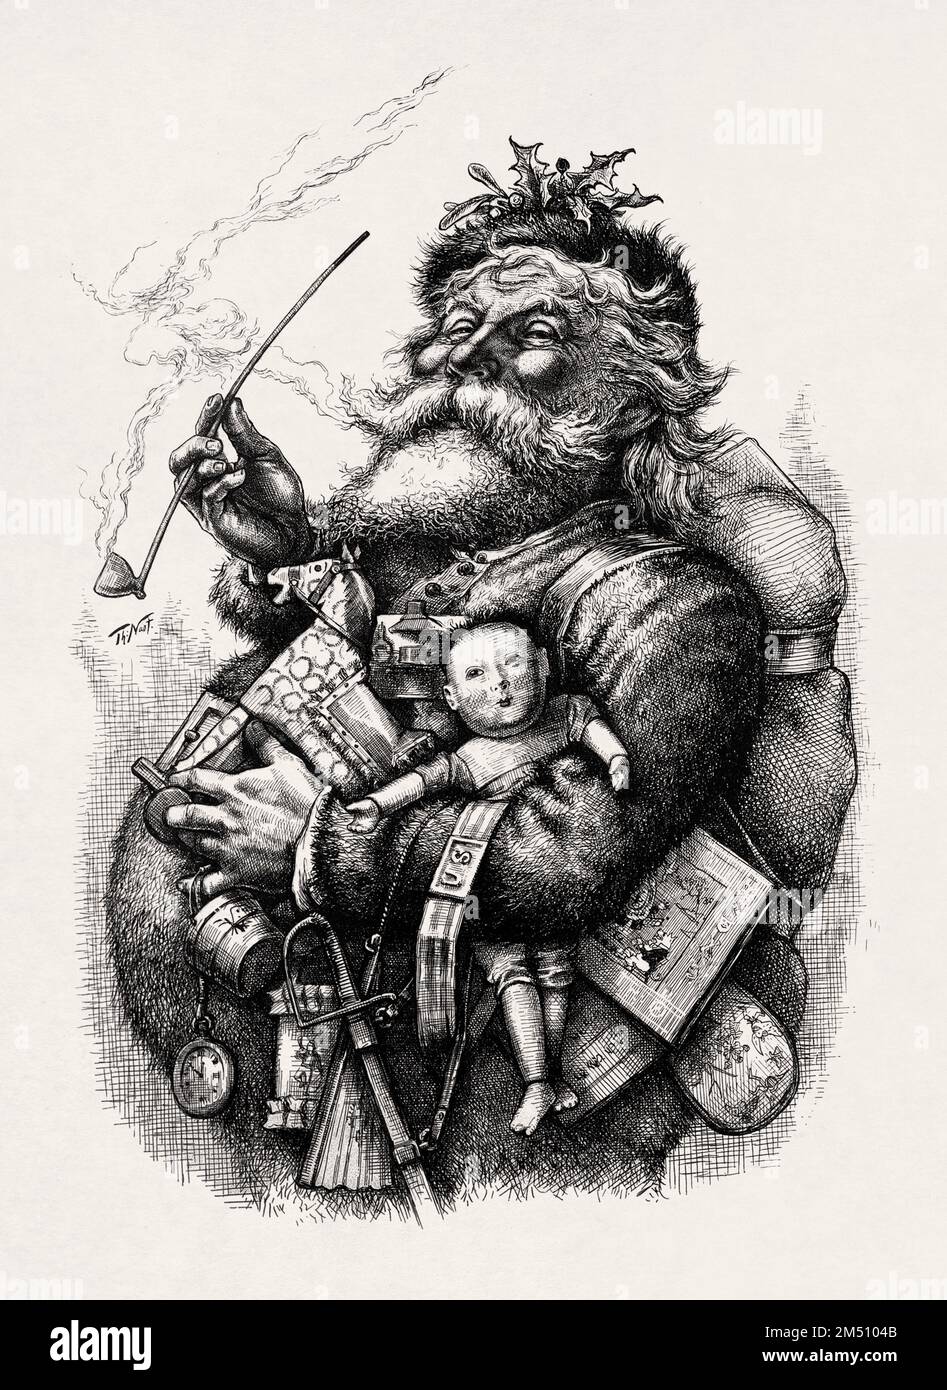 Illustration of Santa Claus by Thomas Nast created in 1881. Stock Photo